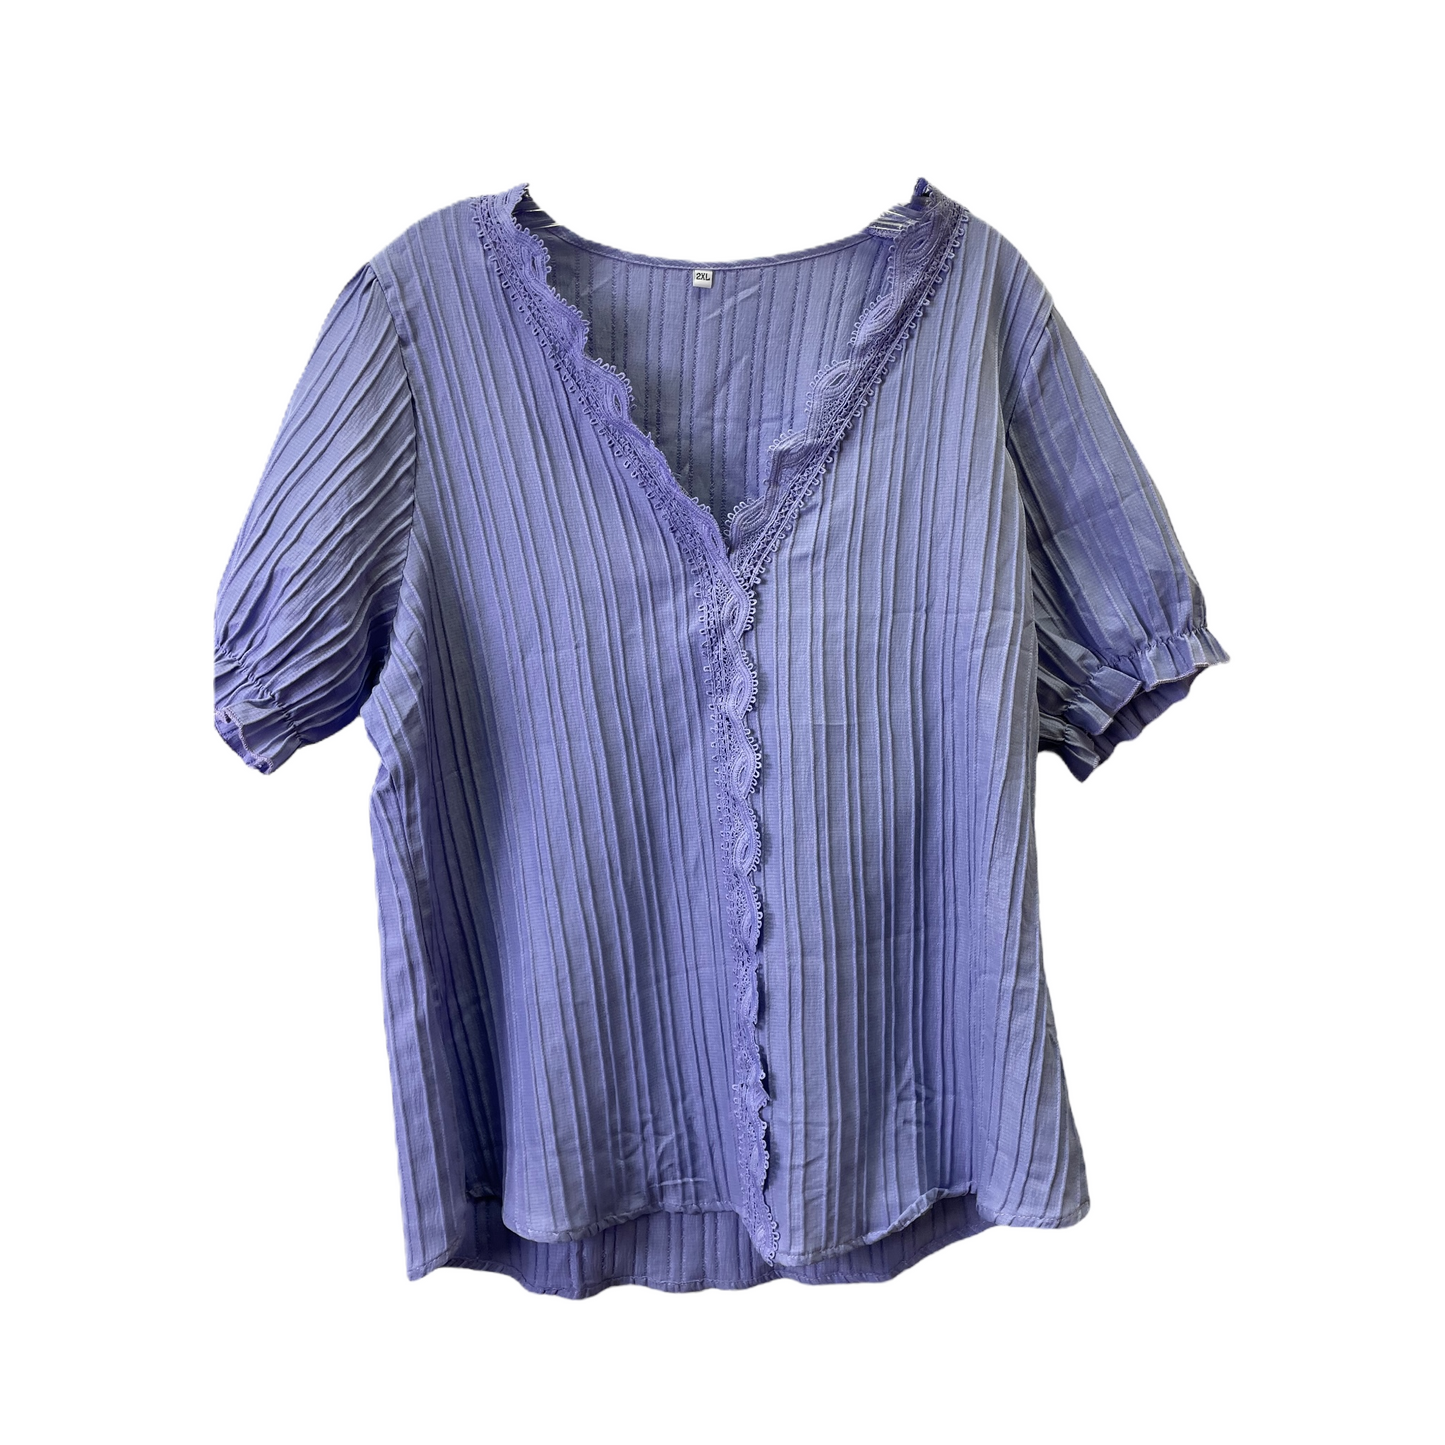 Purple Top Short Sleeve Basic By Cme, Size: 2x